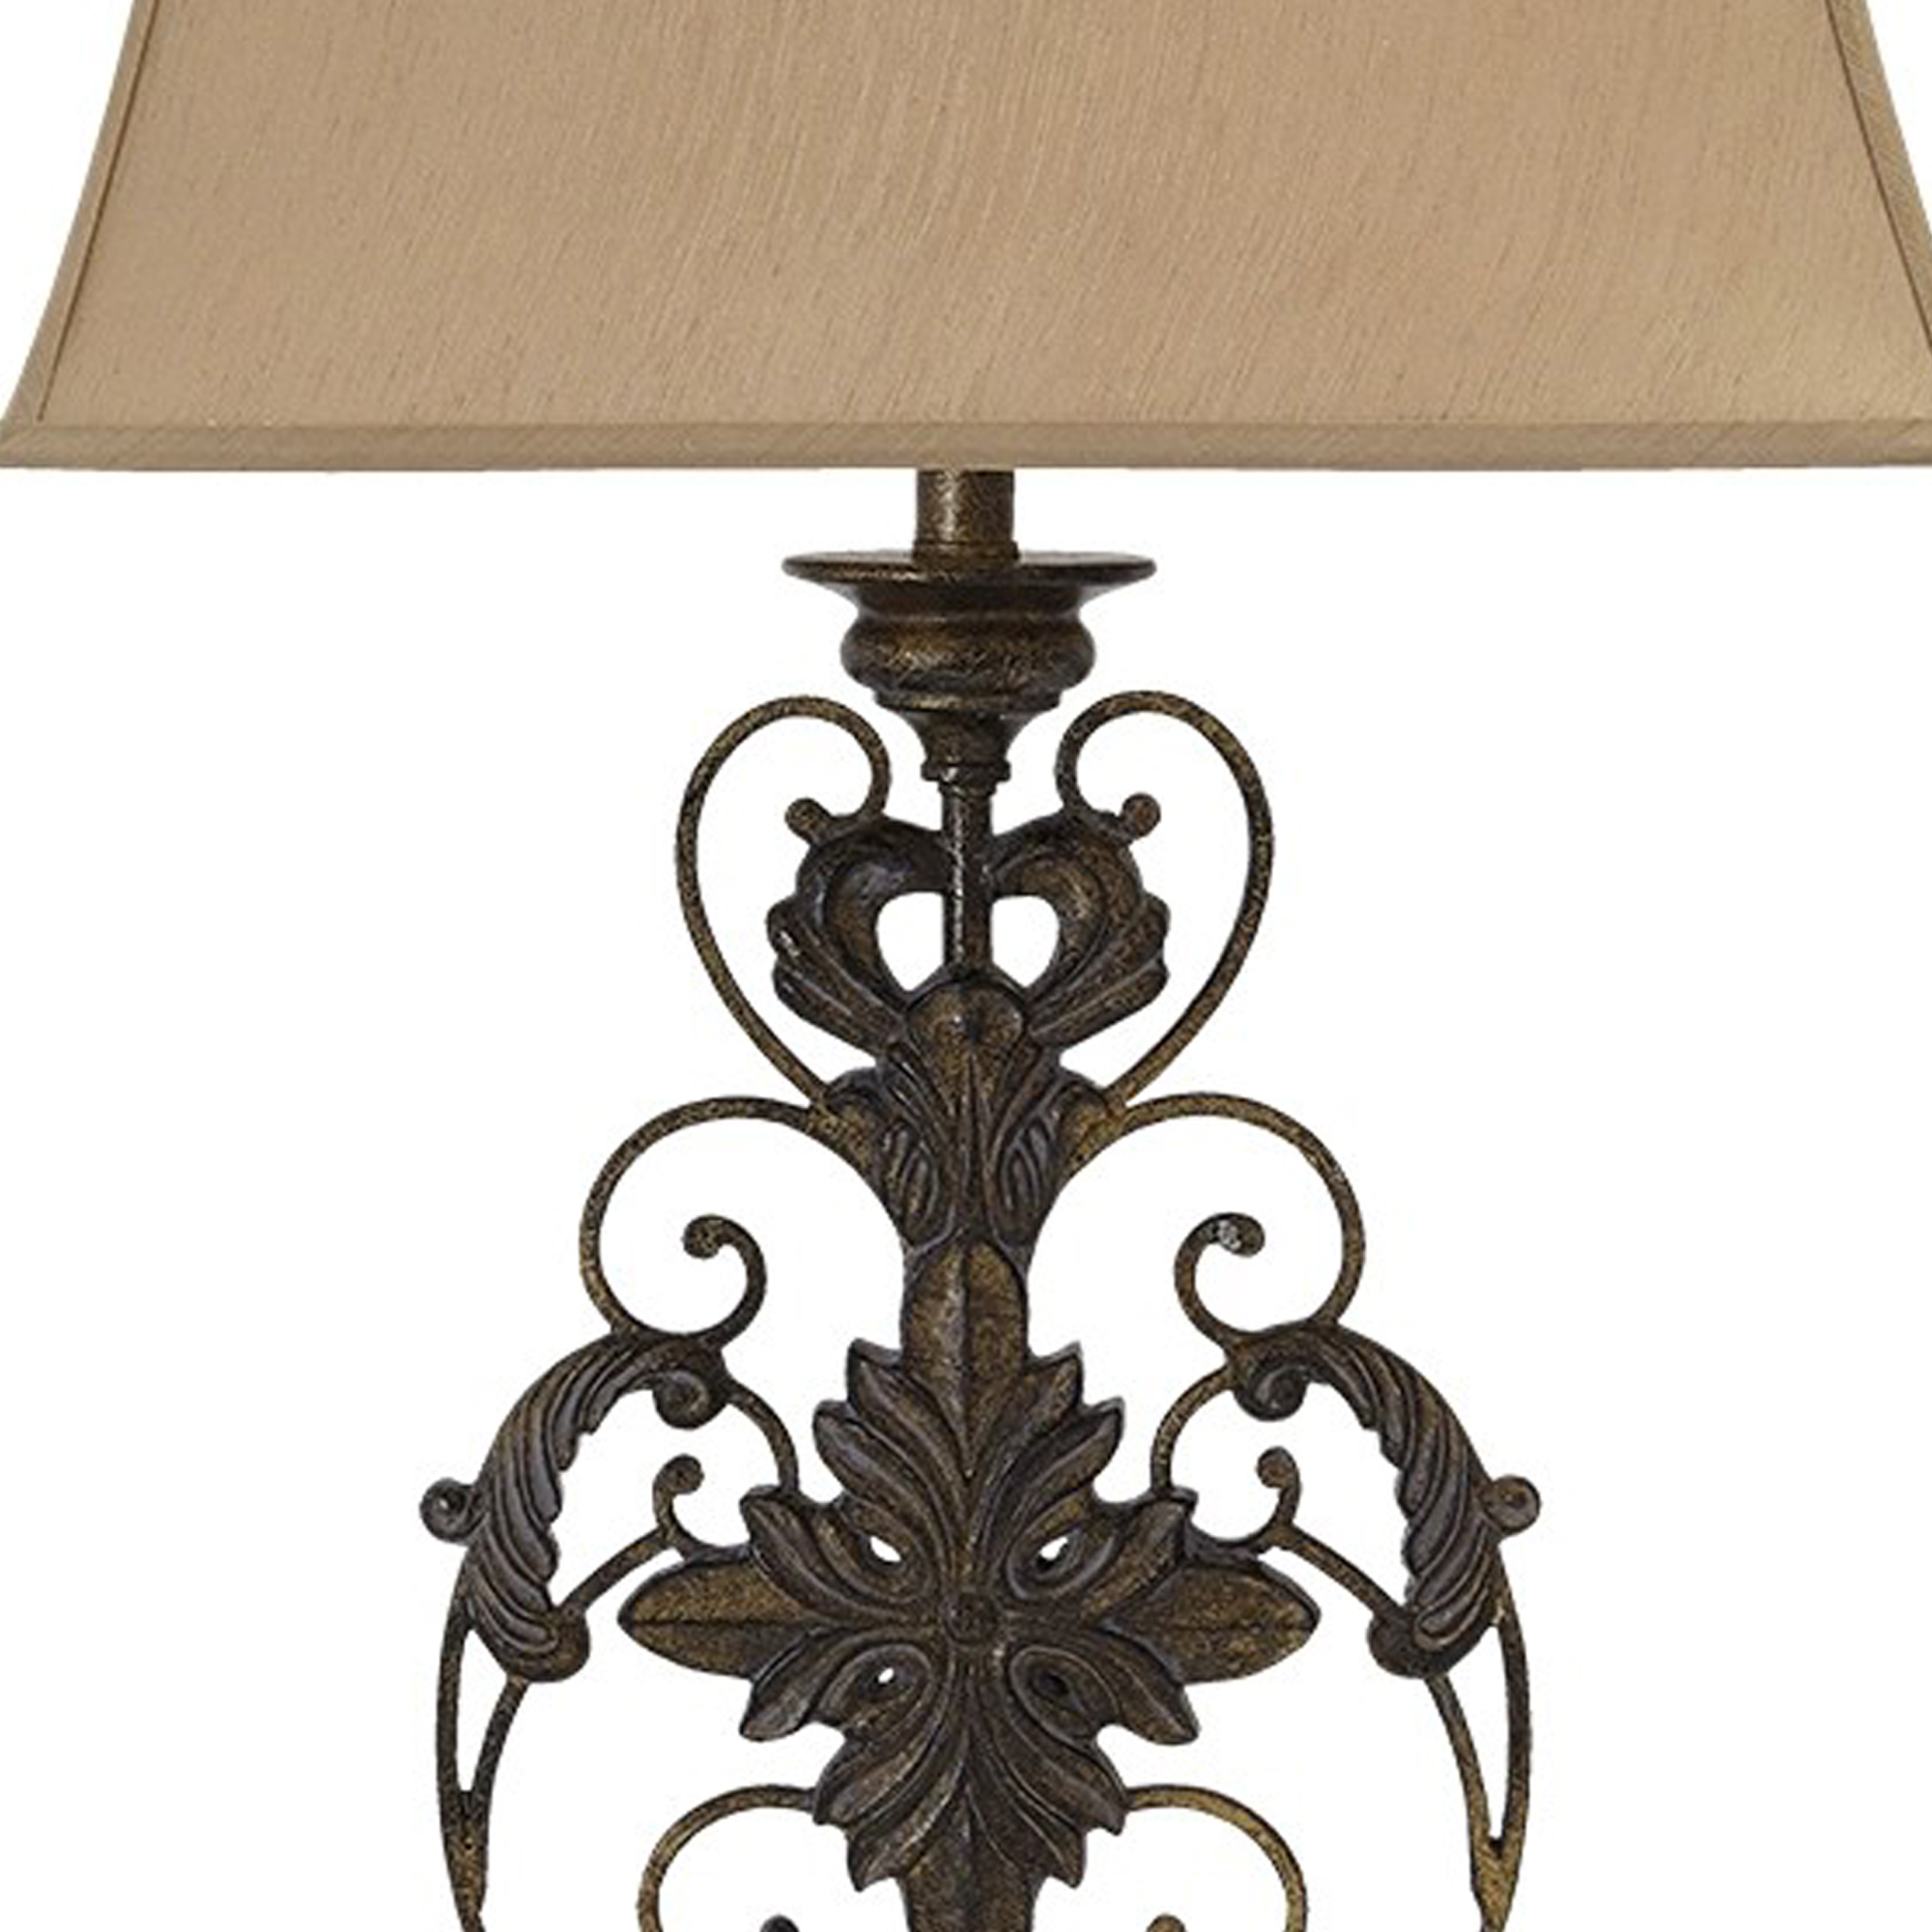 Bell Shape Fabric Shade Table Lamp With Floral Metal Base, Beige And Bronze- Saltoro Sherpi